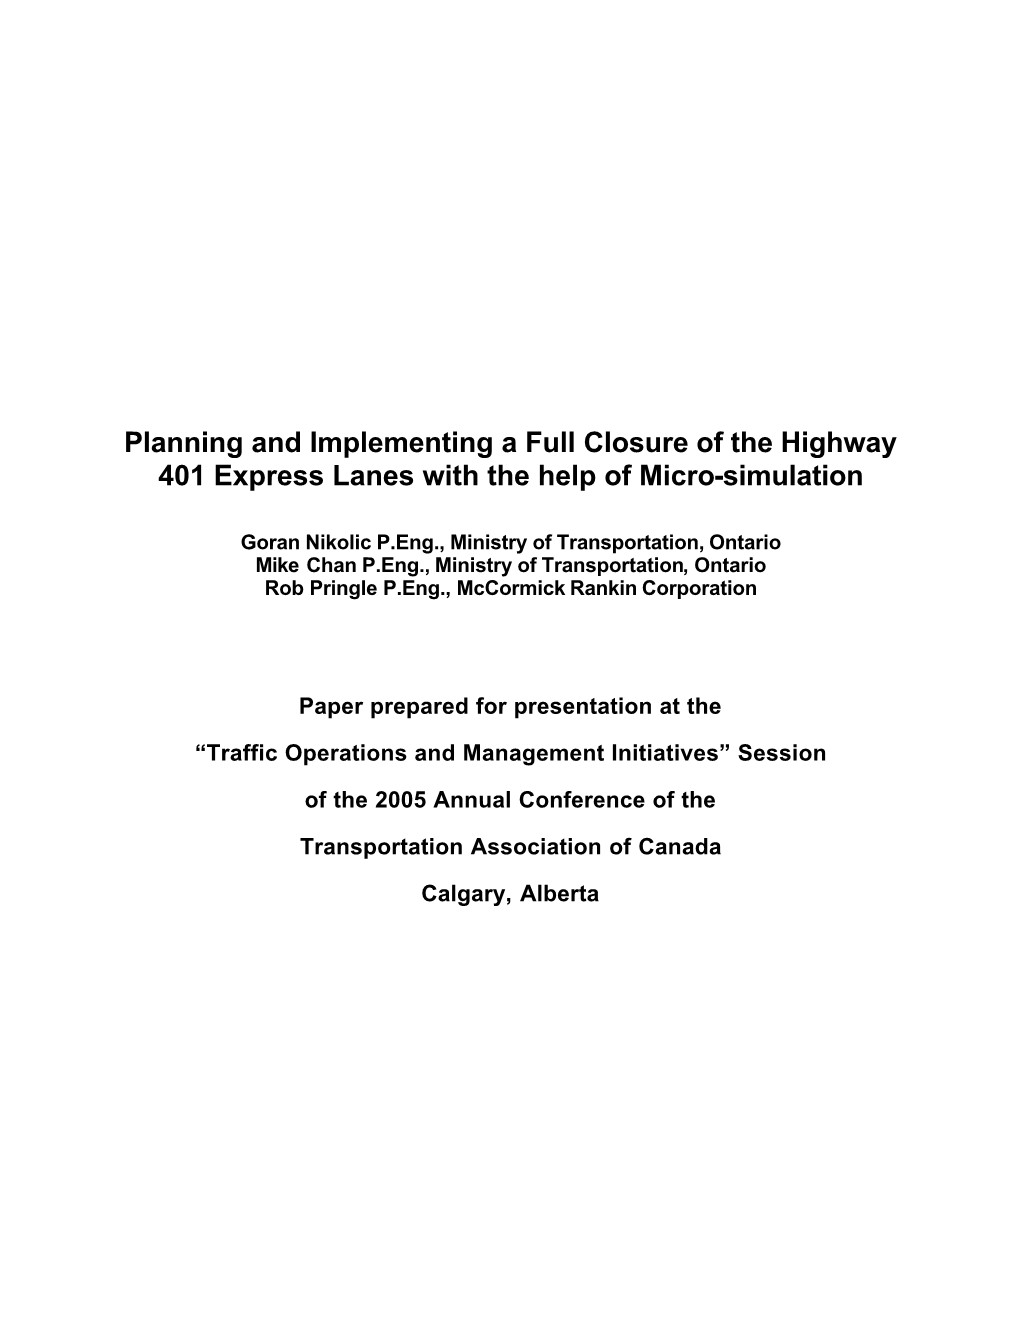 Planning and Implementing a Full Closure of the Highway 401 Express Lanes with the Help of Micro-Simulation